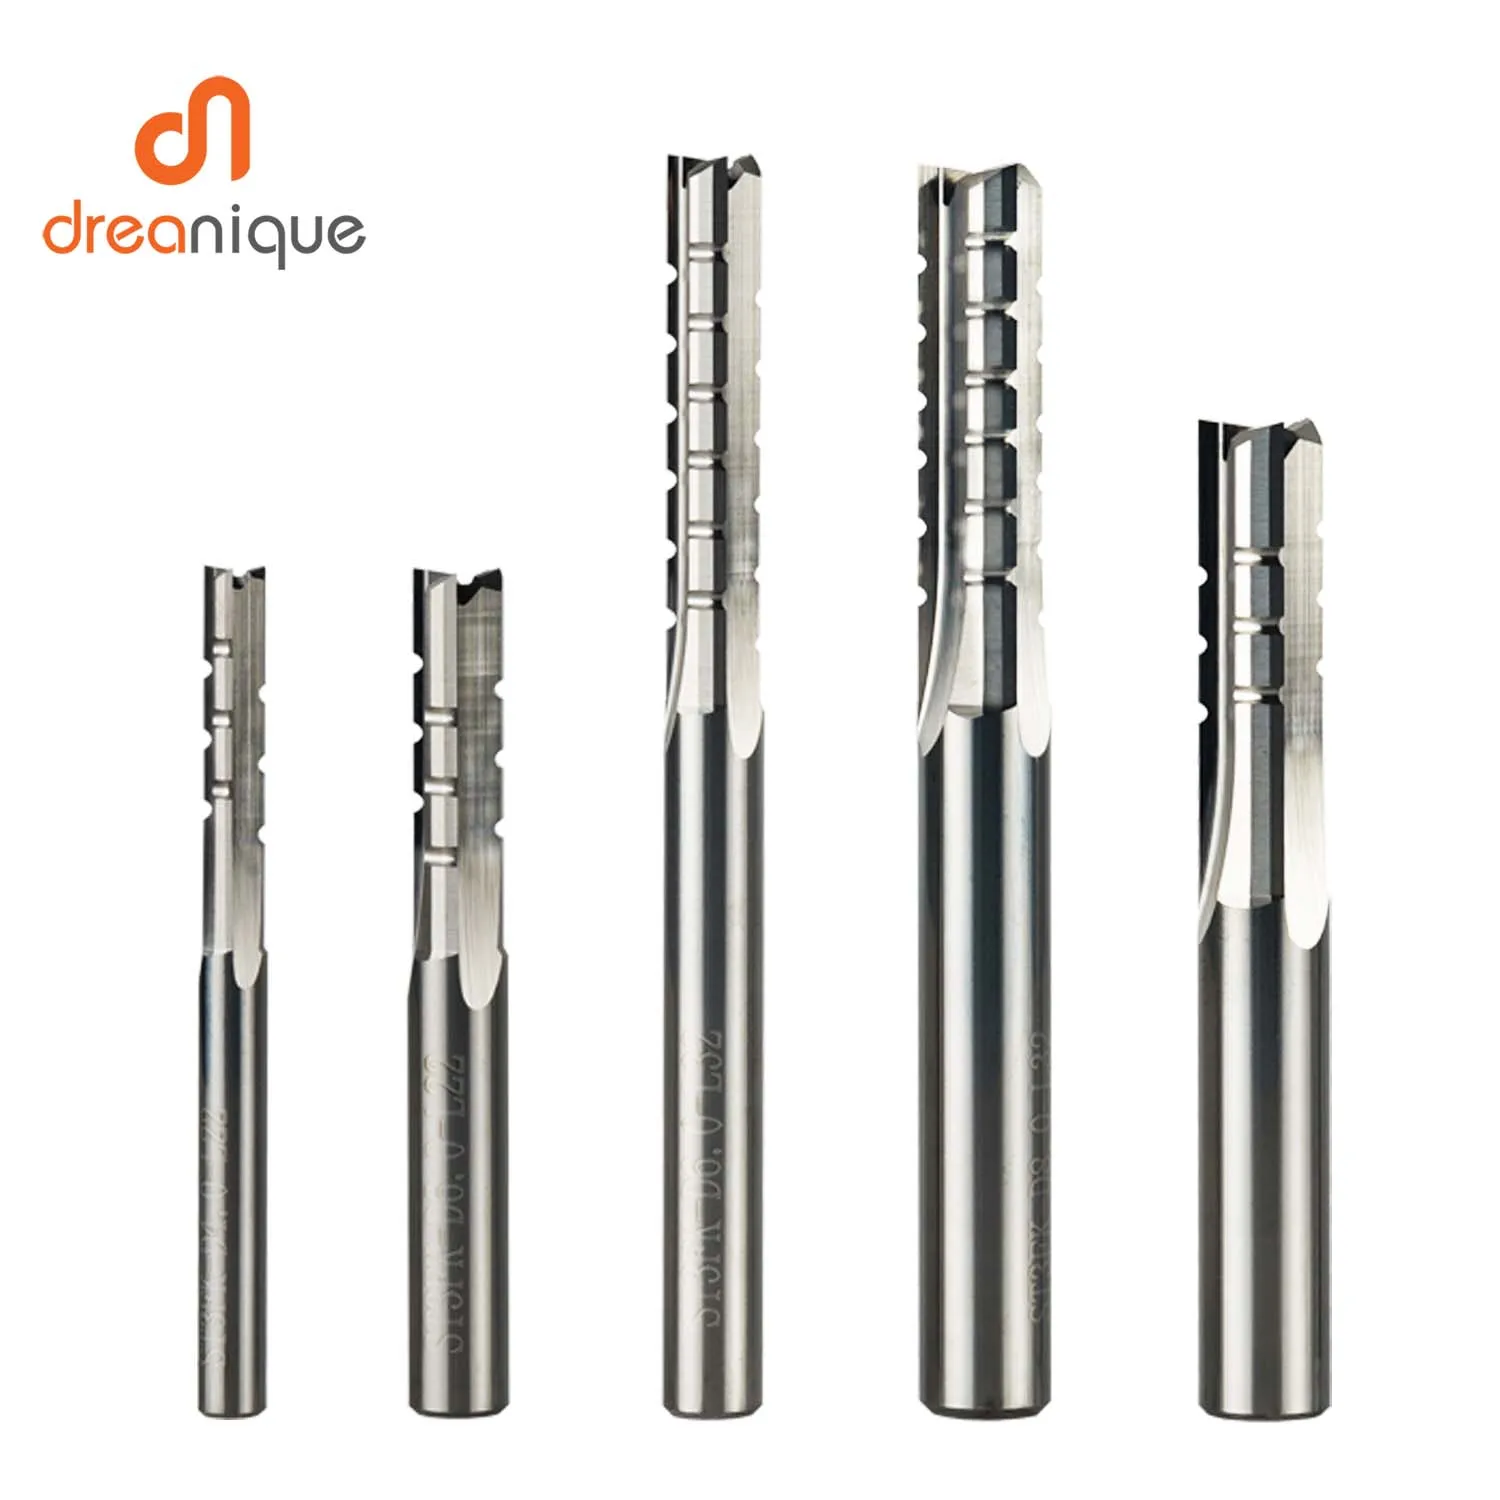 Dreanique 1pc TCT Straight Milling Cutter Woodworking Carving CNC Trimming Slot 3 Flutes Cutting Router Bit Plywood End Mill